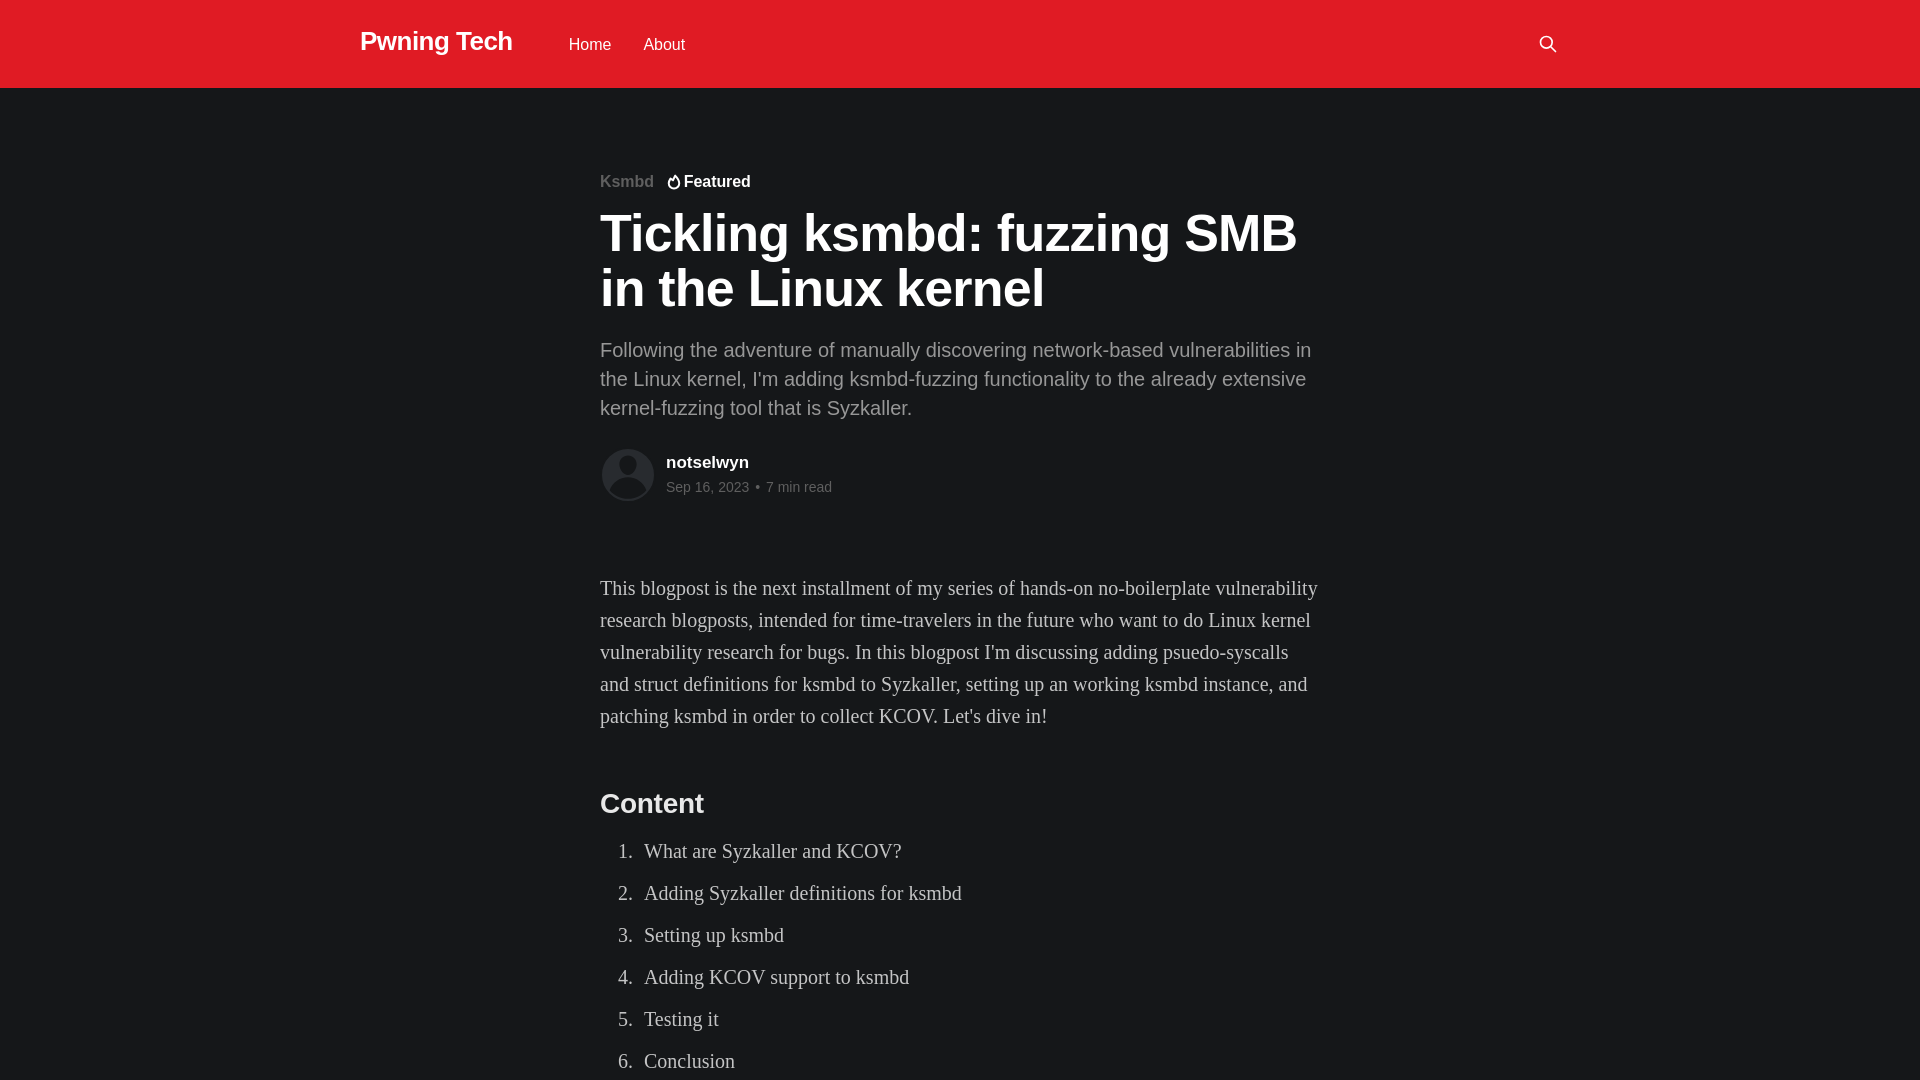 Tickling ksmbd: fuzzing SMB in the Linux kernel